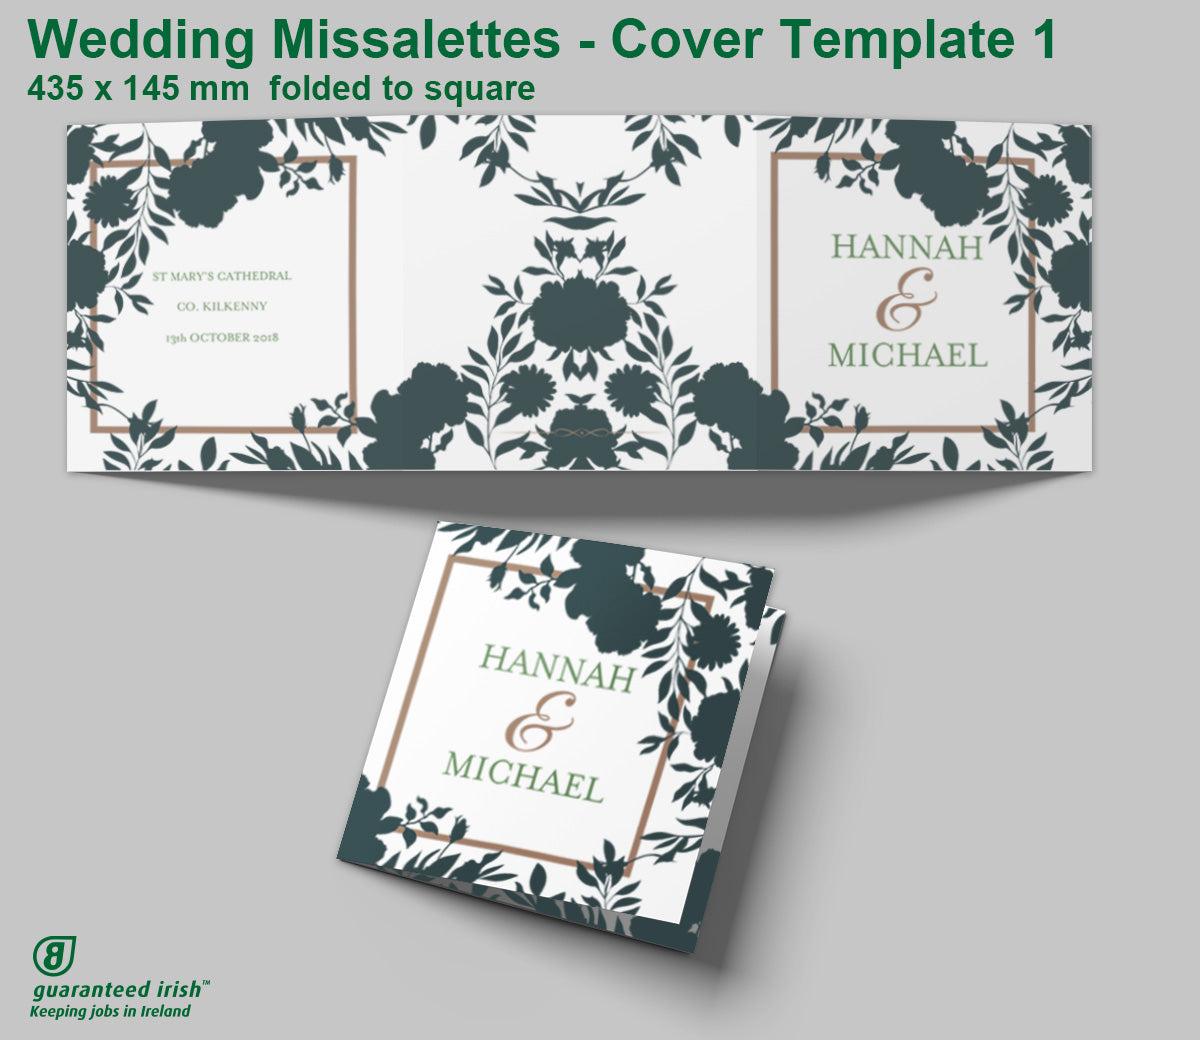 Wedding Missalettes - Cover Template 1